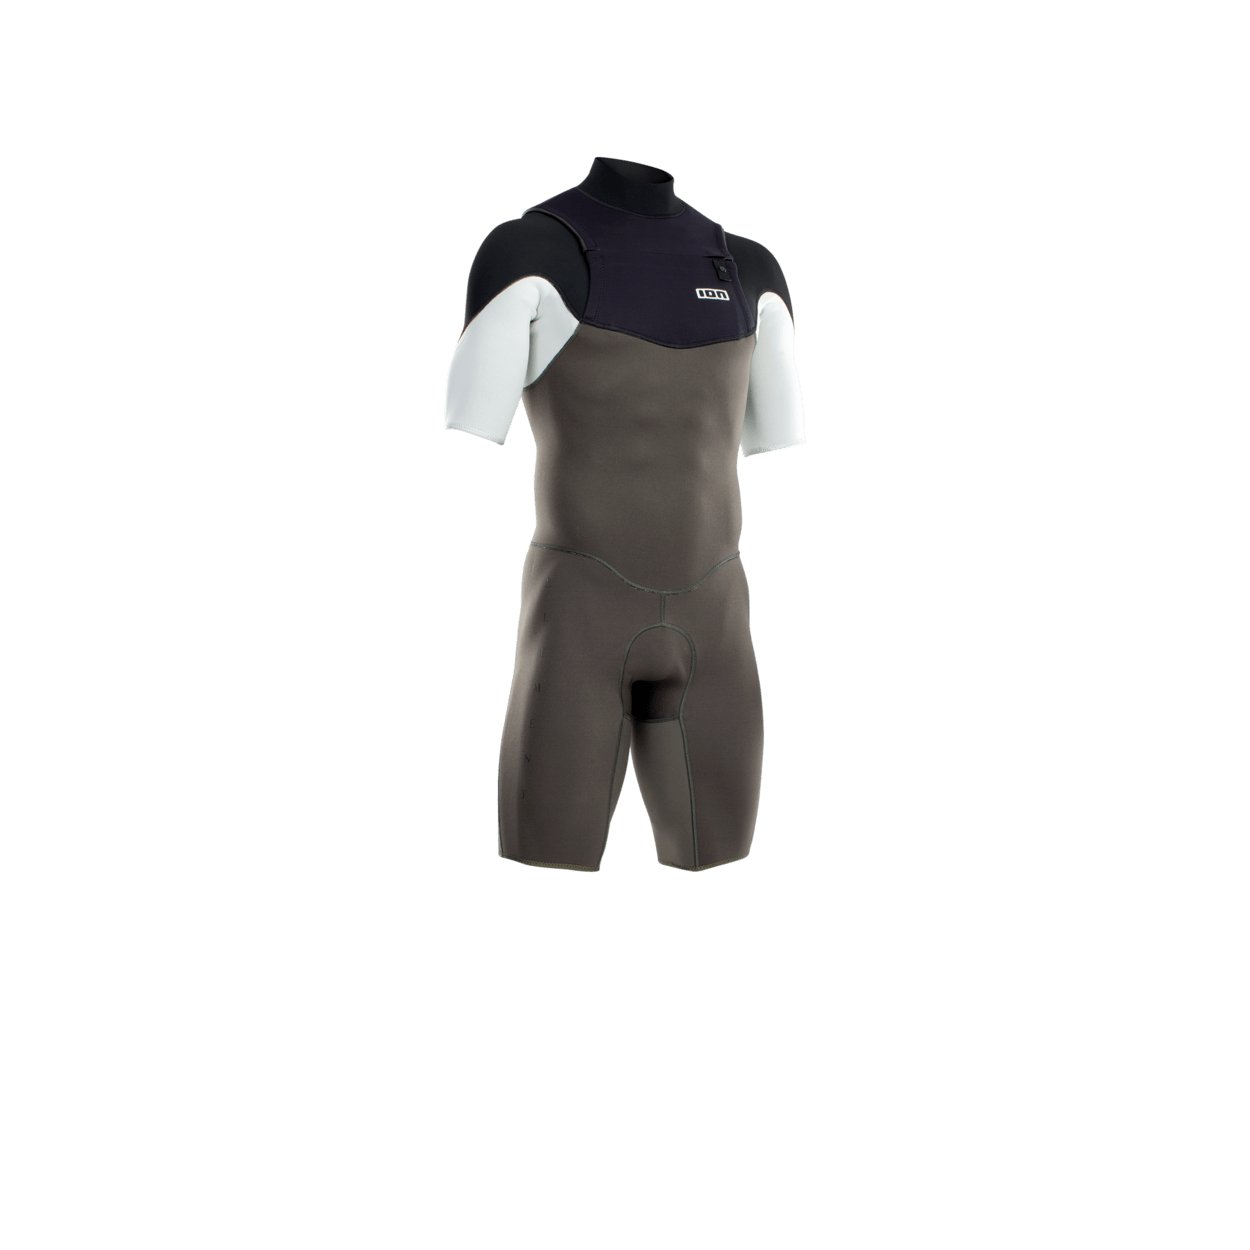 ION Men Wetsuit Element 2/2 Shorty Shortsleeve Front Zip 2022 - Worthing Watersports - 9008415951208 - Wetsuits - ION Water